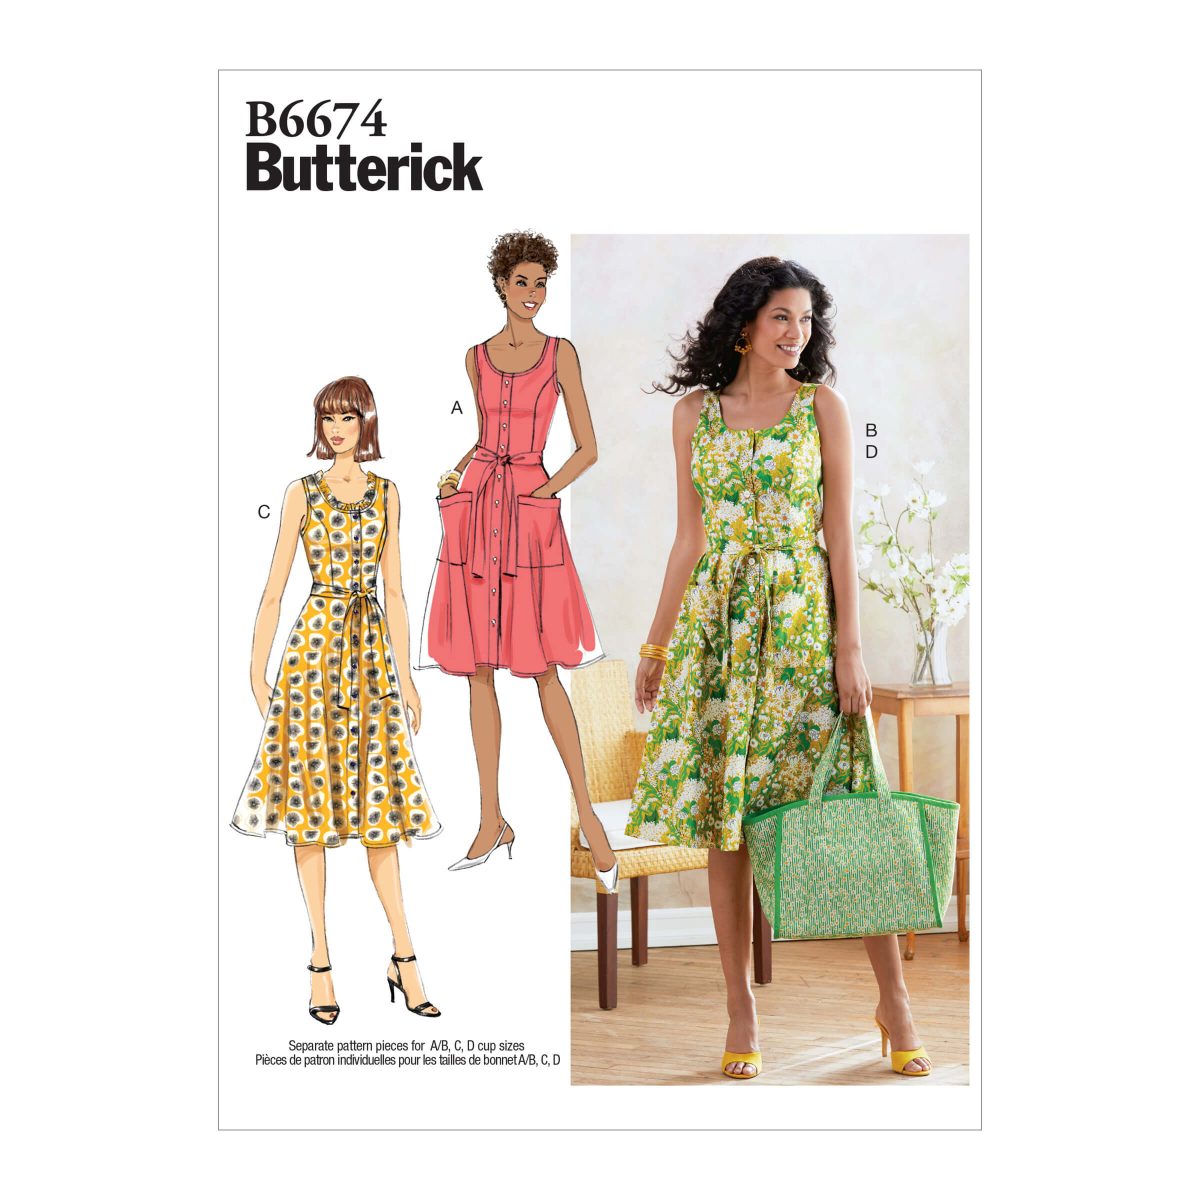 Butterick Sewing Pattern B6674 Misses' Dress, Sash and Bag